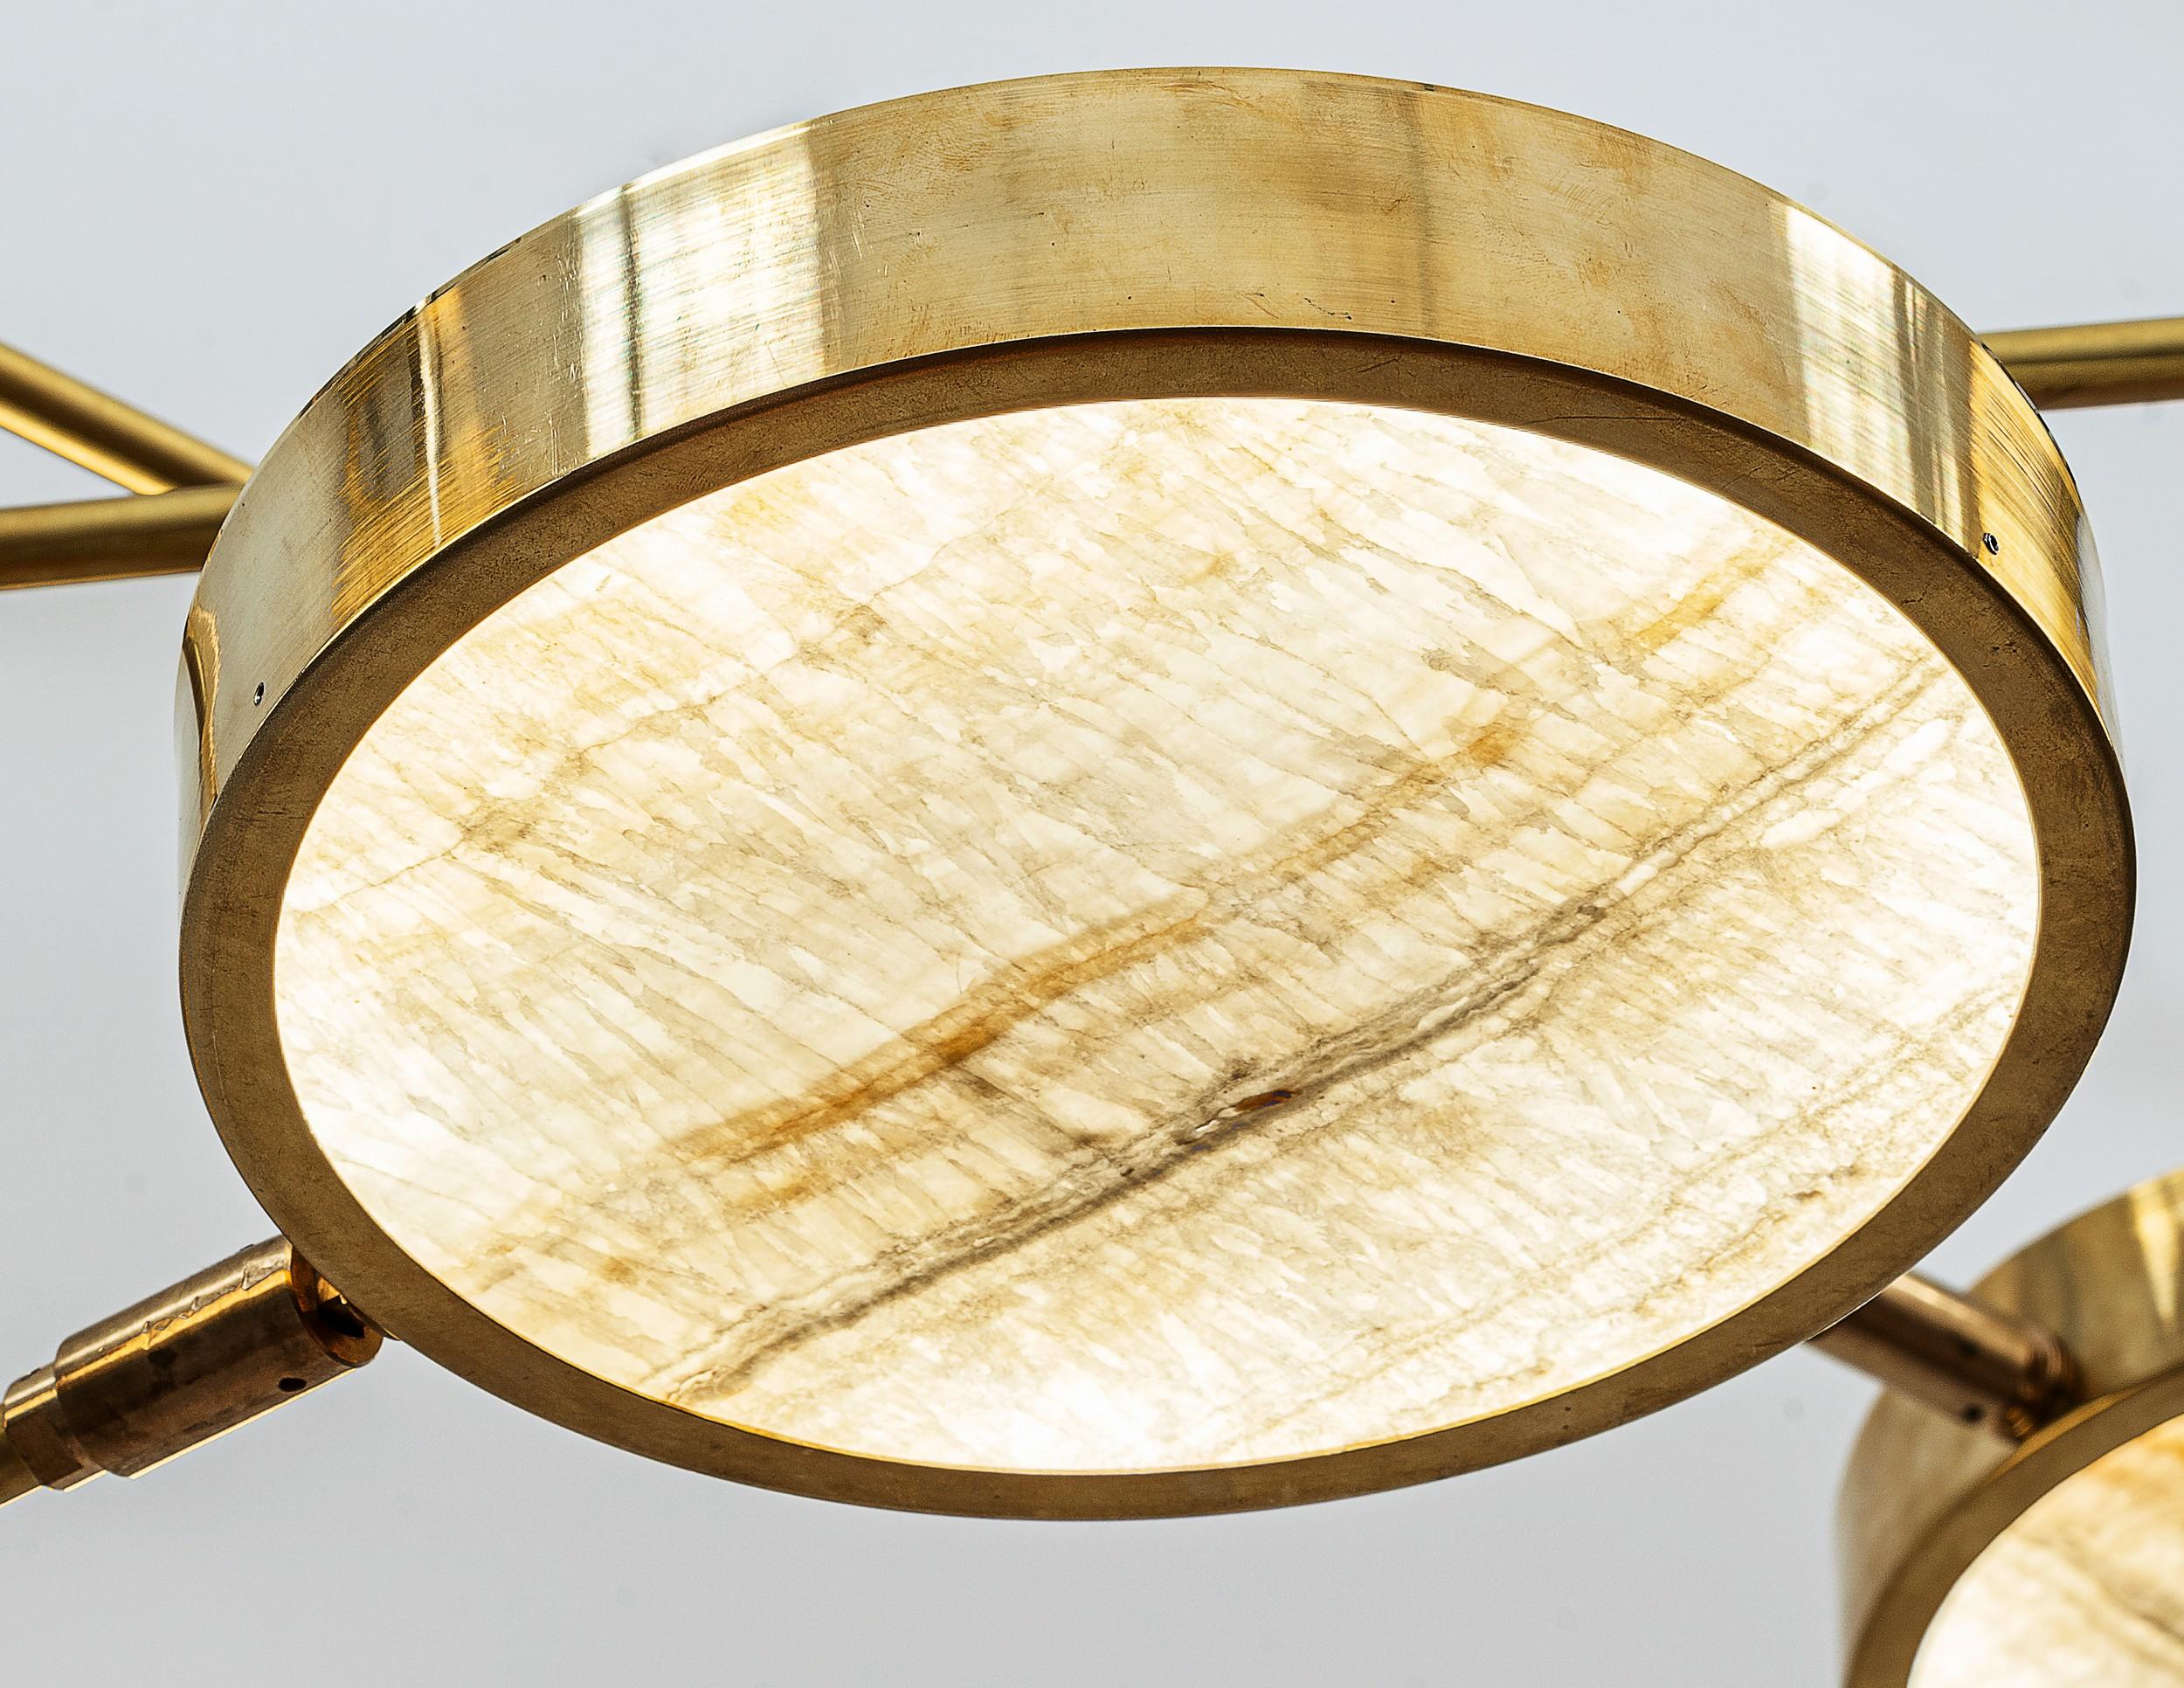 Patinated Sistema Solare Chandelier, Piattelli Design, Ivory-toned Onyx and Brass, 6-shade For Sale